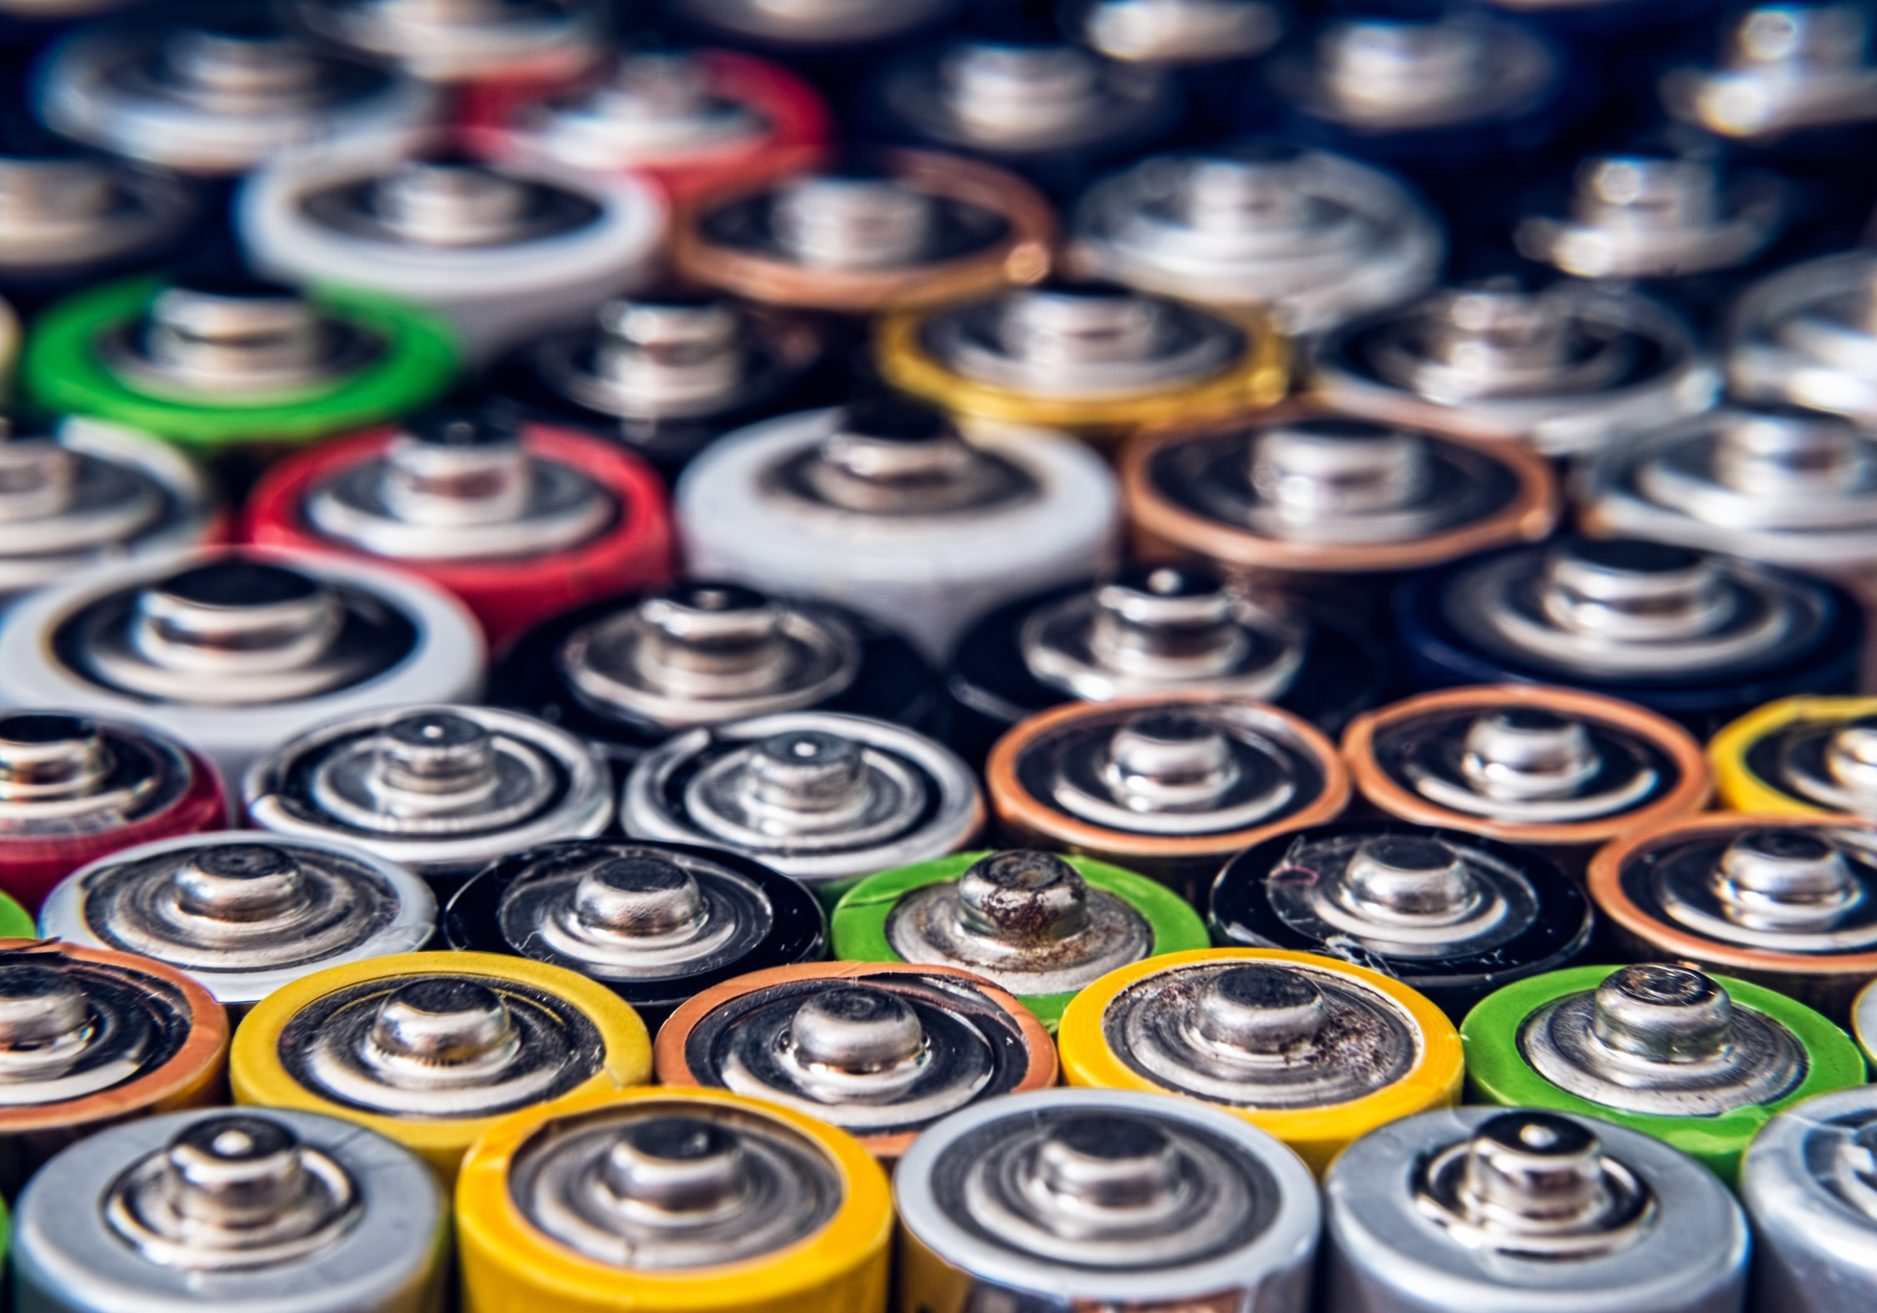 Batteries of different colours side by side, illustration.